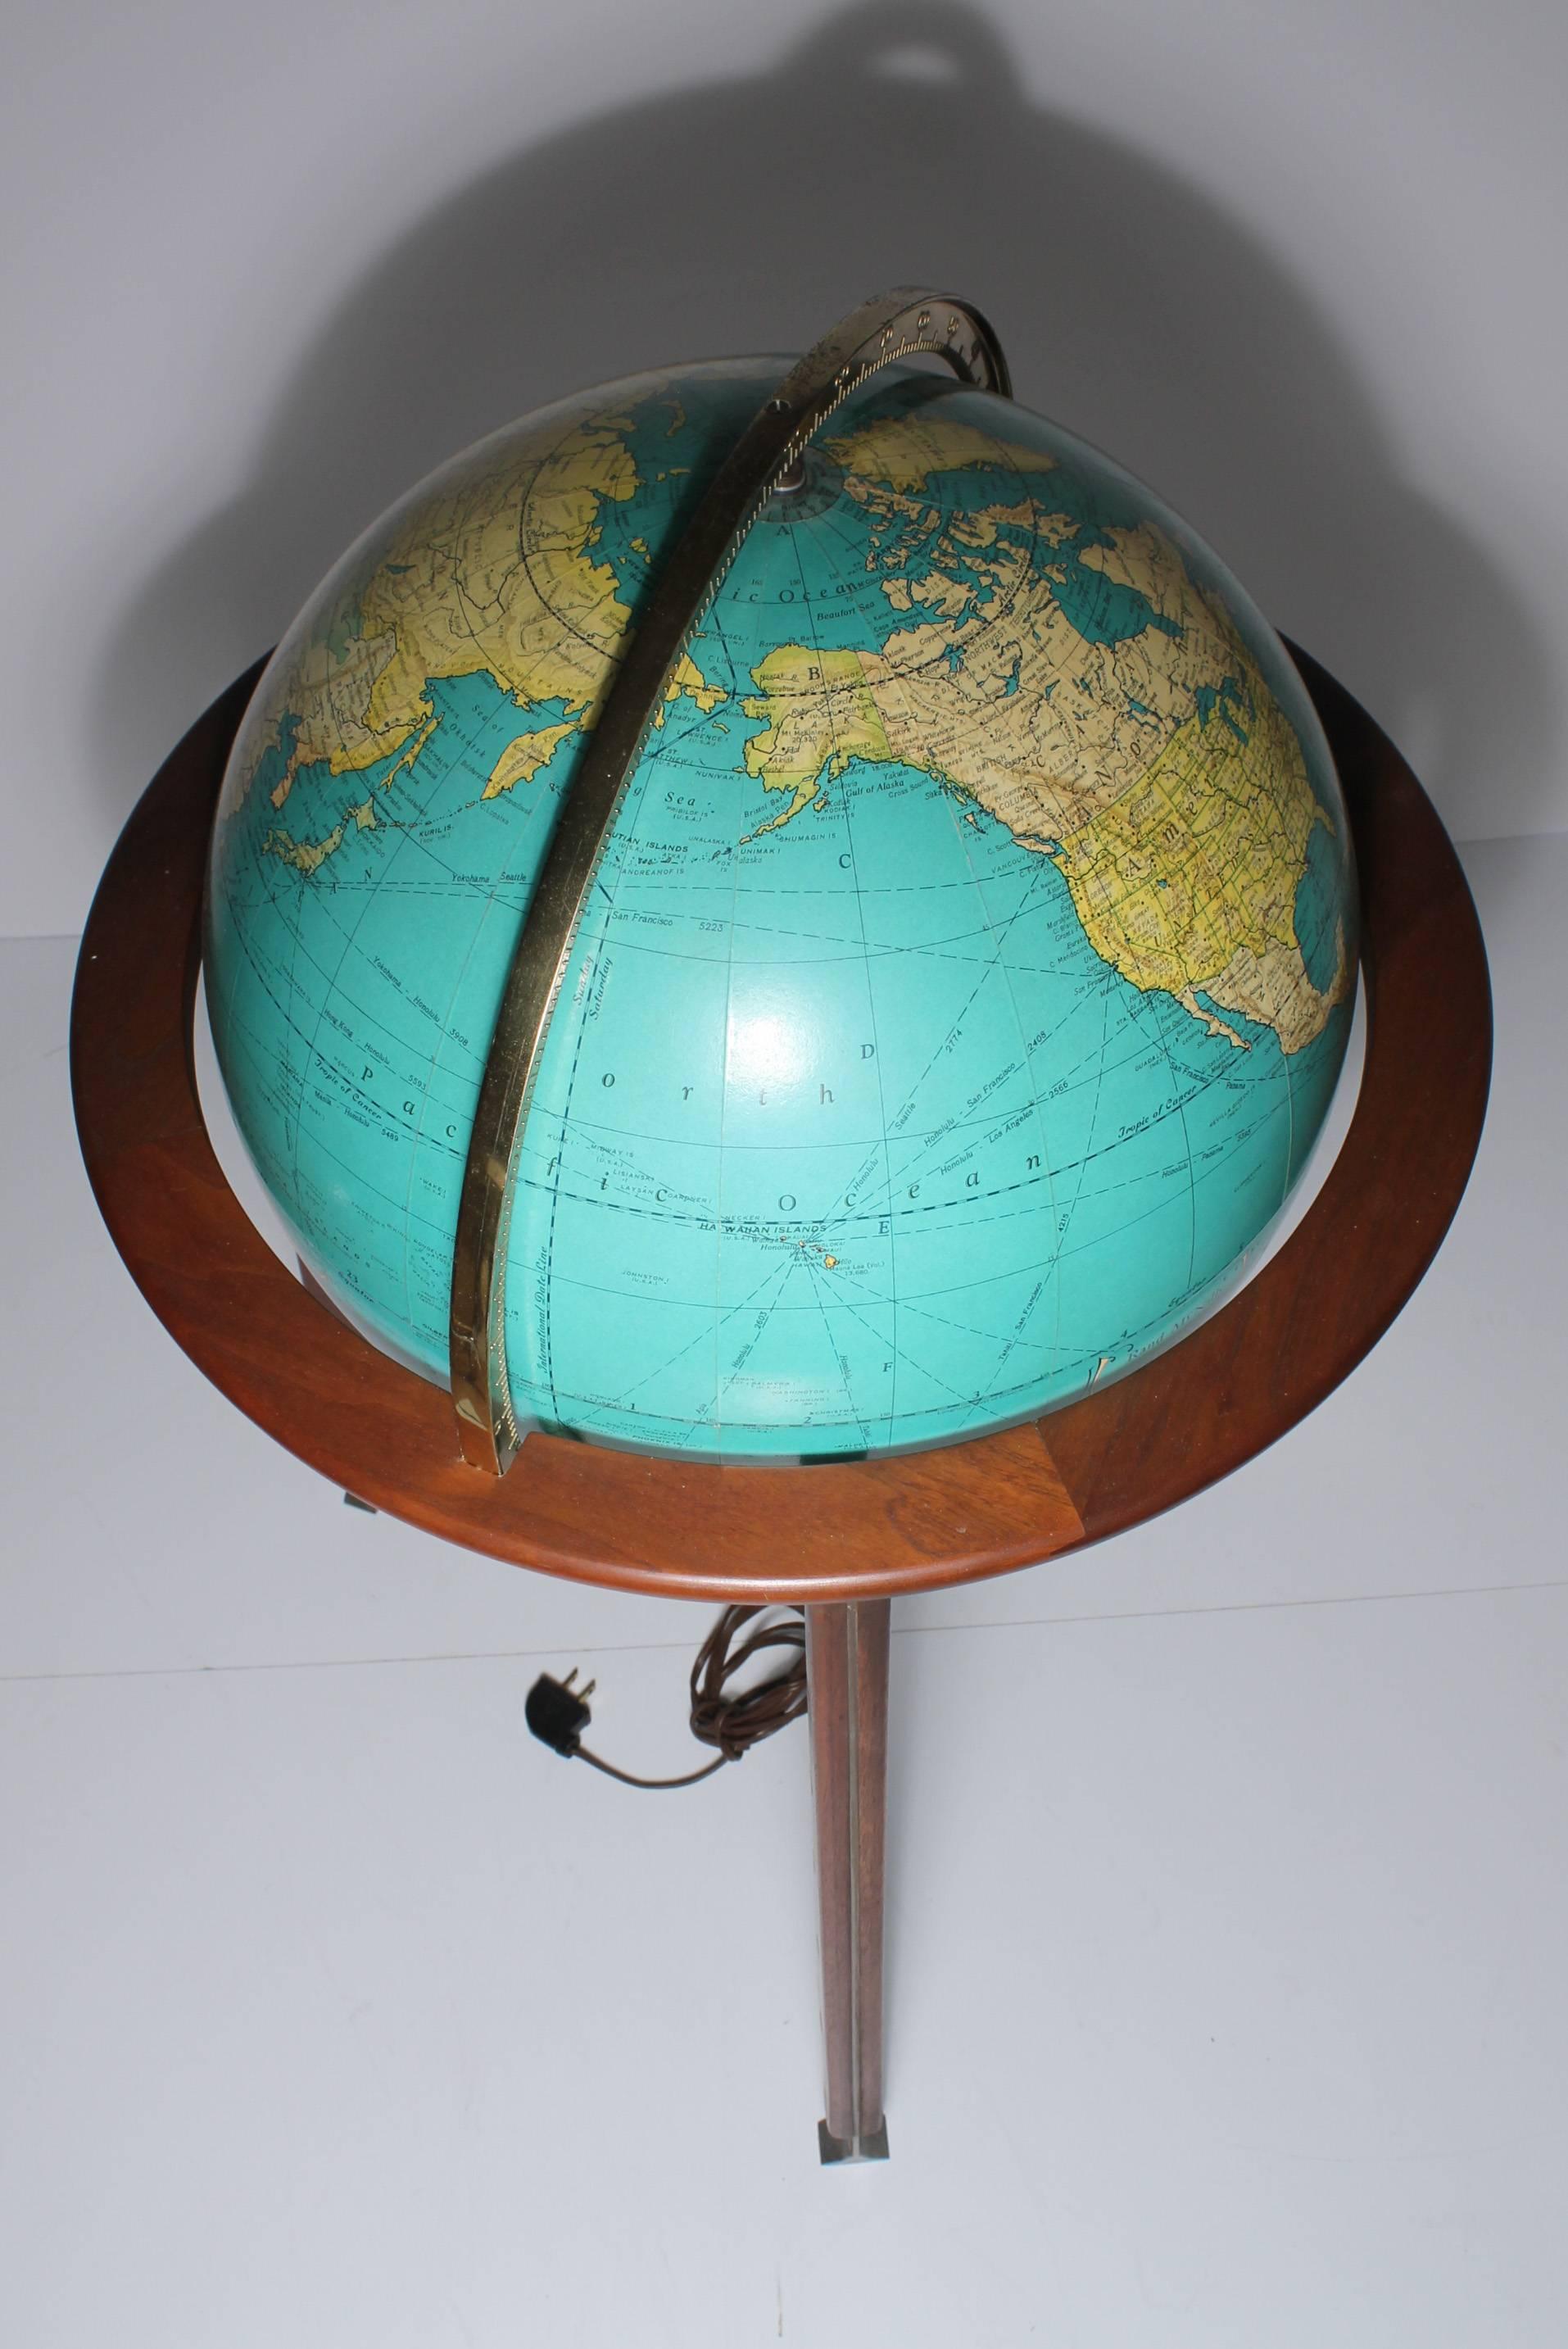 20th Century Illuminated Globe Lamp by Edward Wormley for Dunbar (Featured in Catalog) For Sale